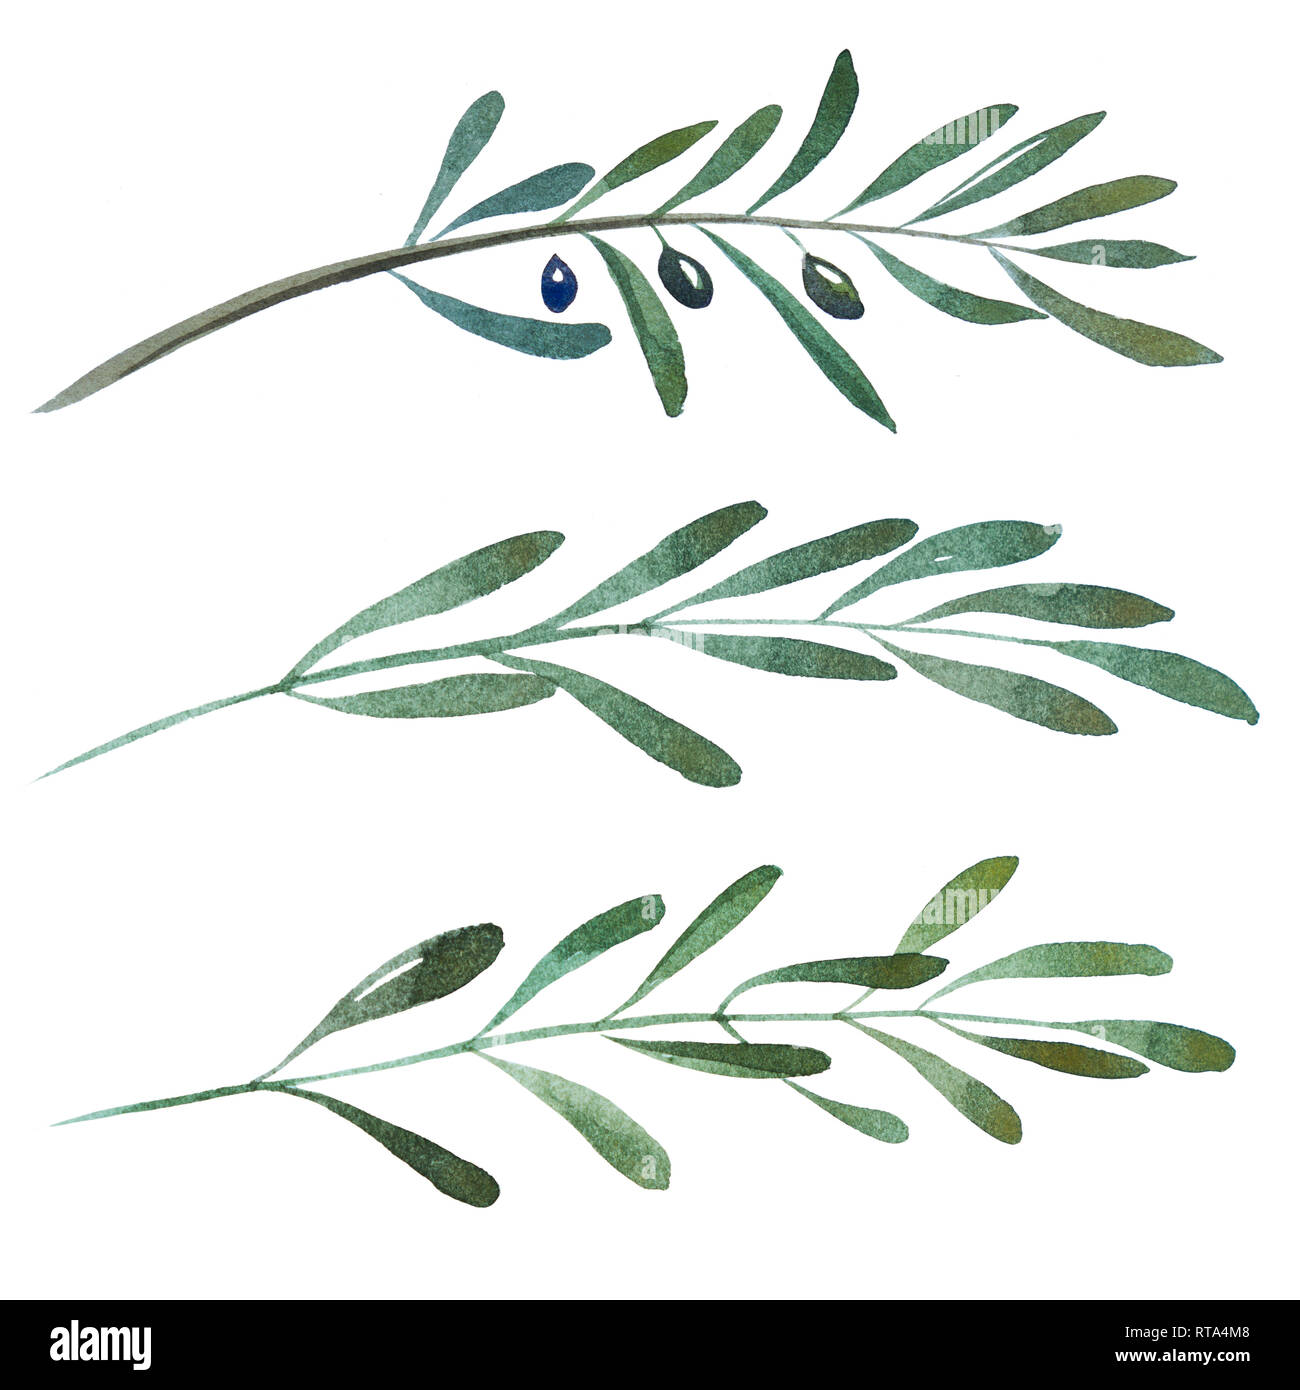 2d hand drawn watercolor graphic elements. Colorful natural illustrations of olive branches and leaves. Stock Photo